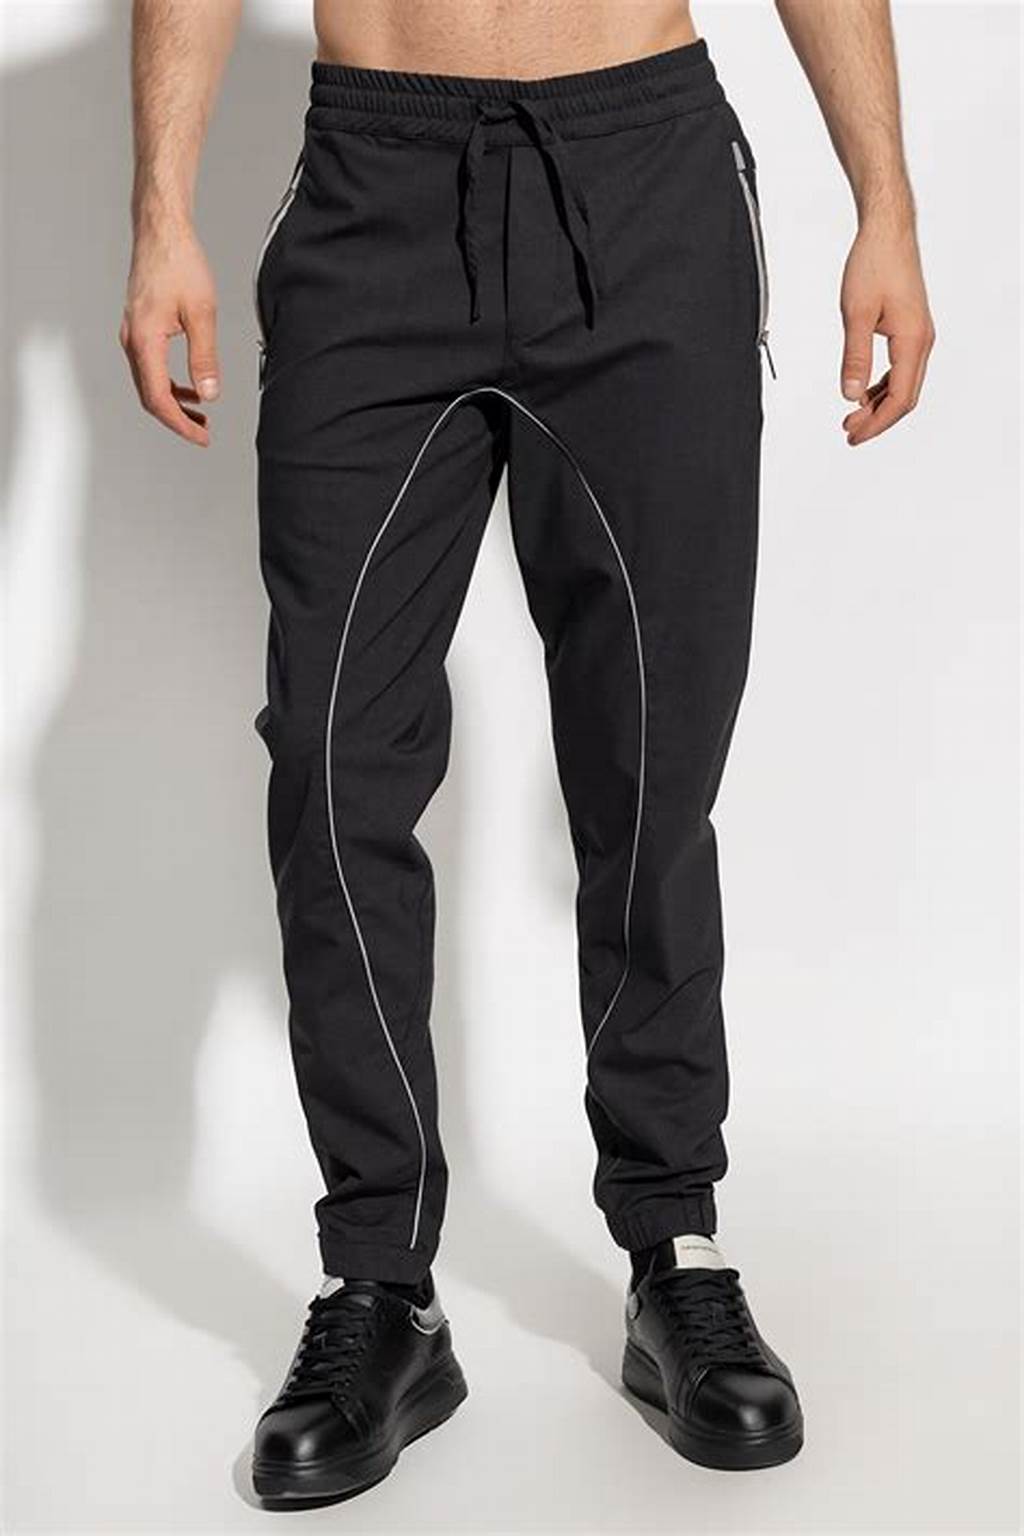 Why You Should Invest in Men’s Jogger Pants?